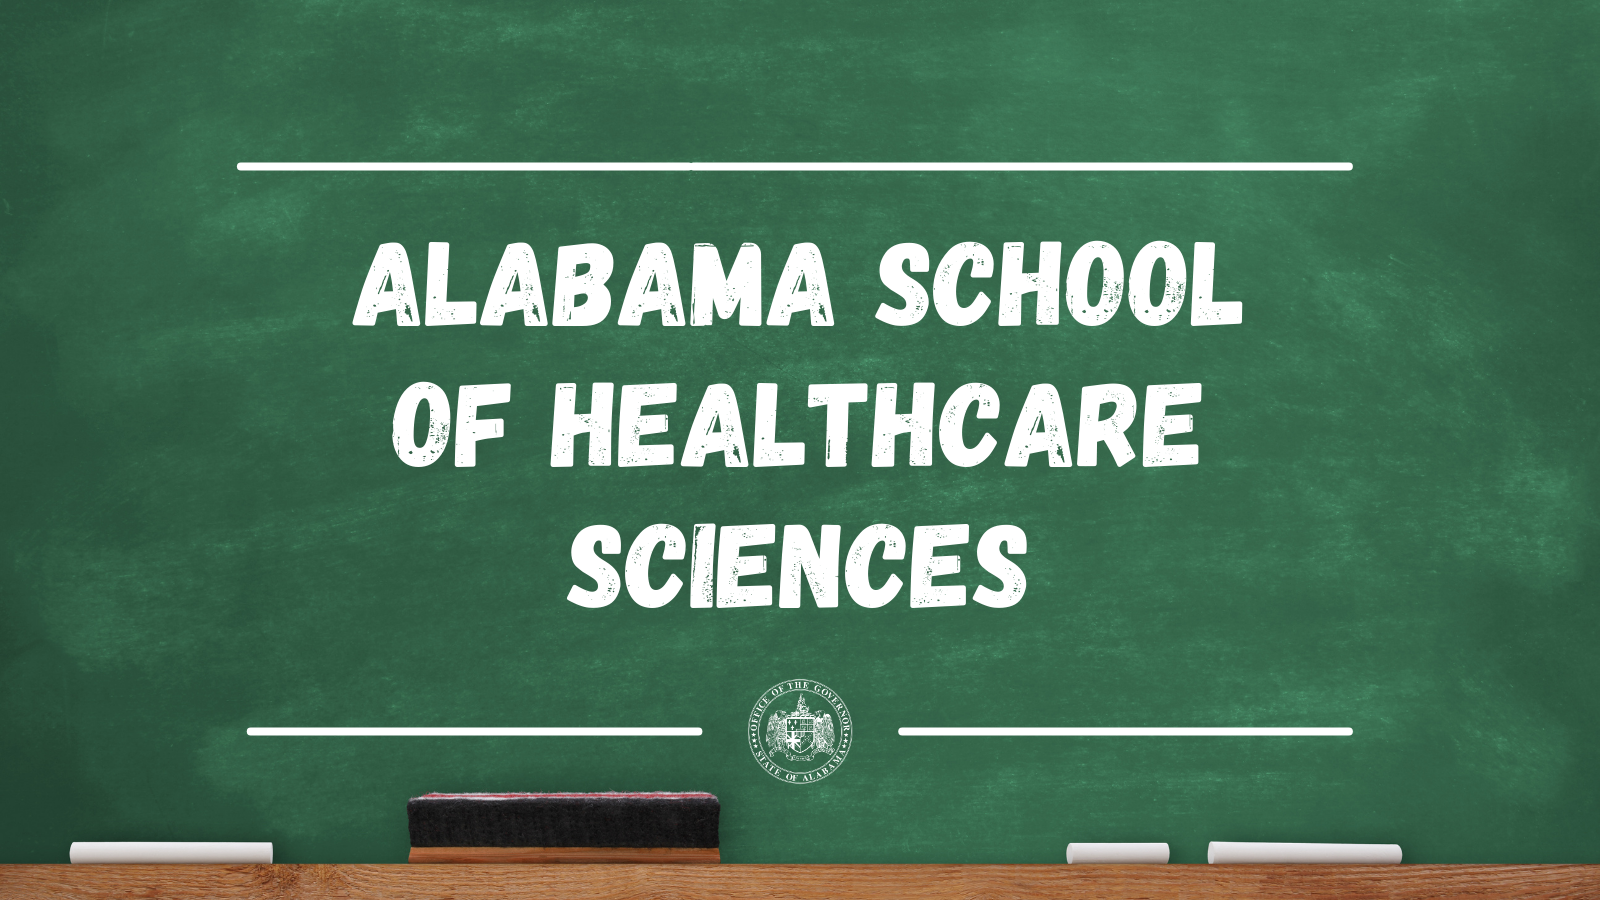 Governor Ivey Commends Legislature for Answering Her Call to Establish Alabama School of Healthcare Sciences